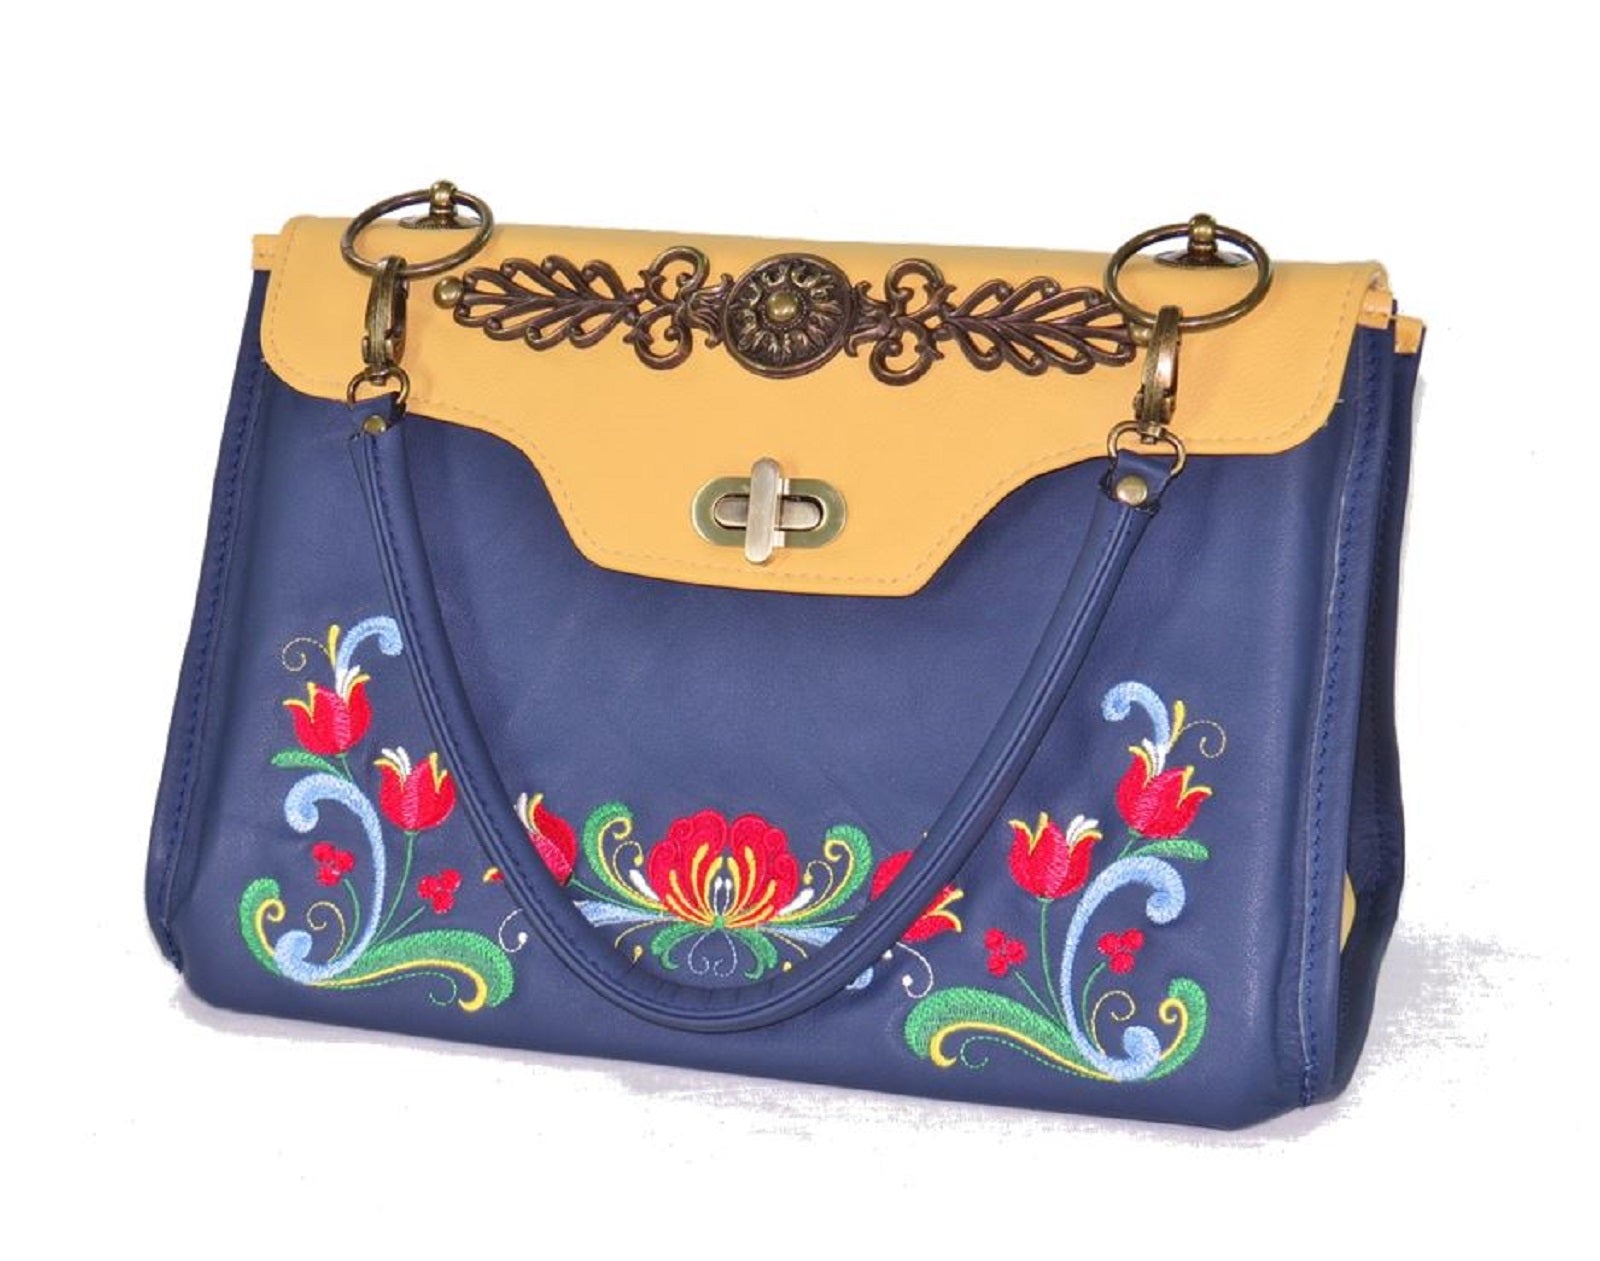 Norwegian Embroidered Rosemaling Blue and Yellow Leather Handbag